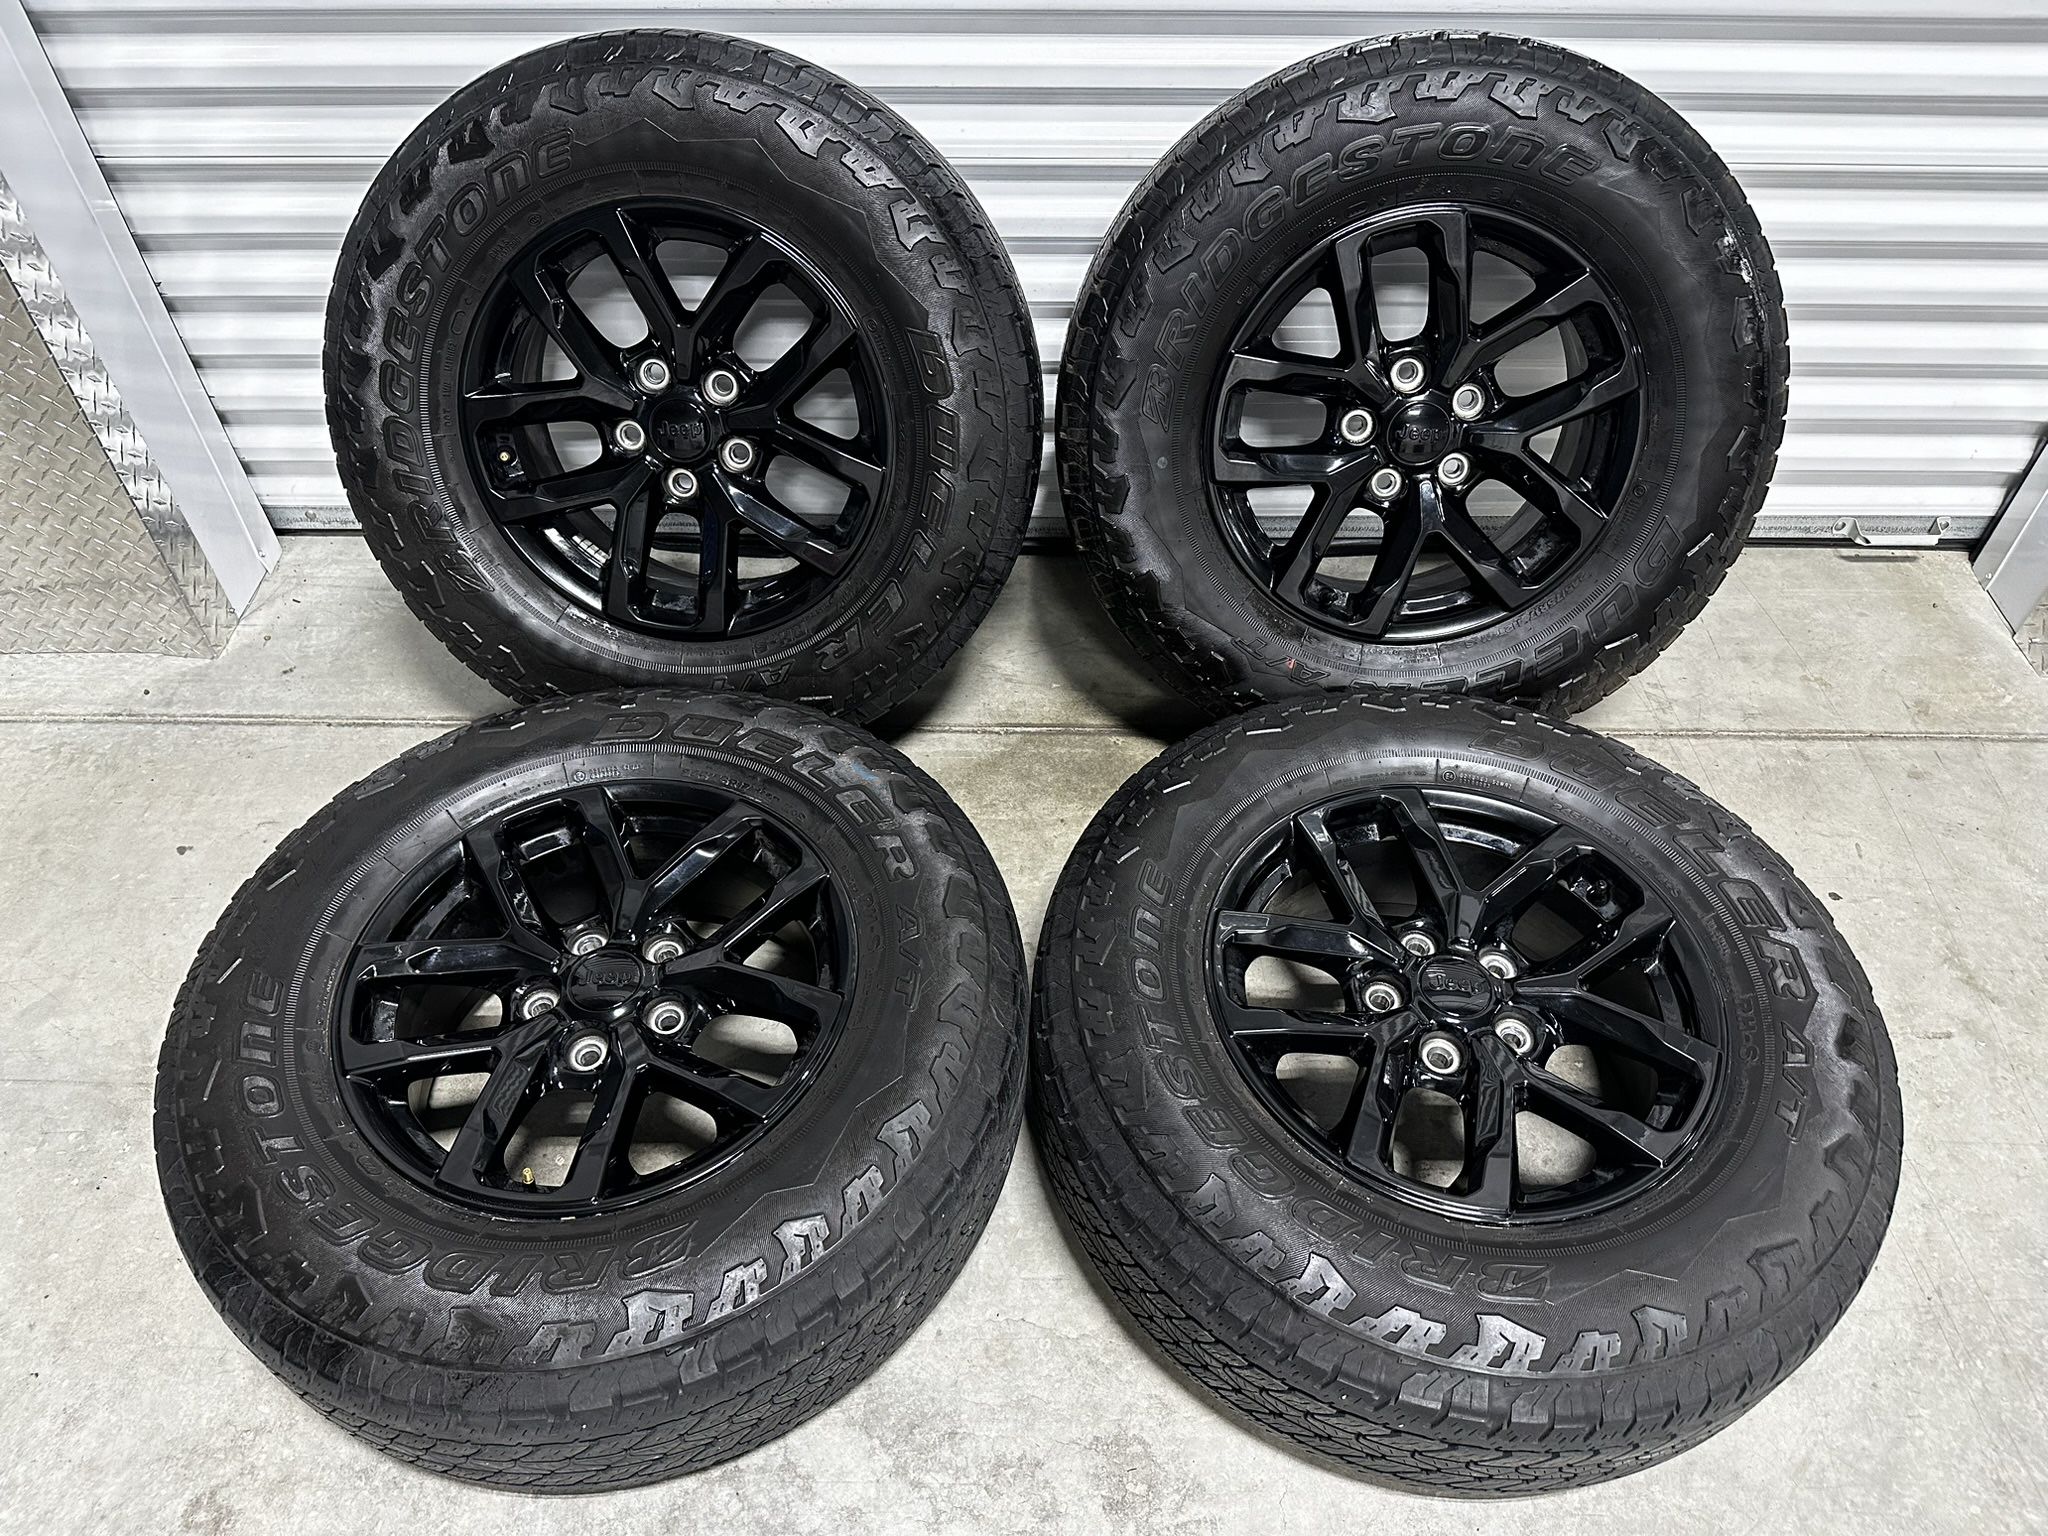 2020 Jeep Wrangler/Gladiator Wheels and Tires